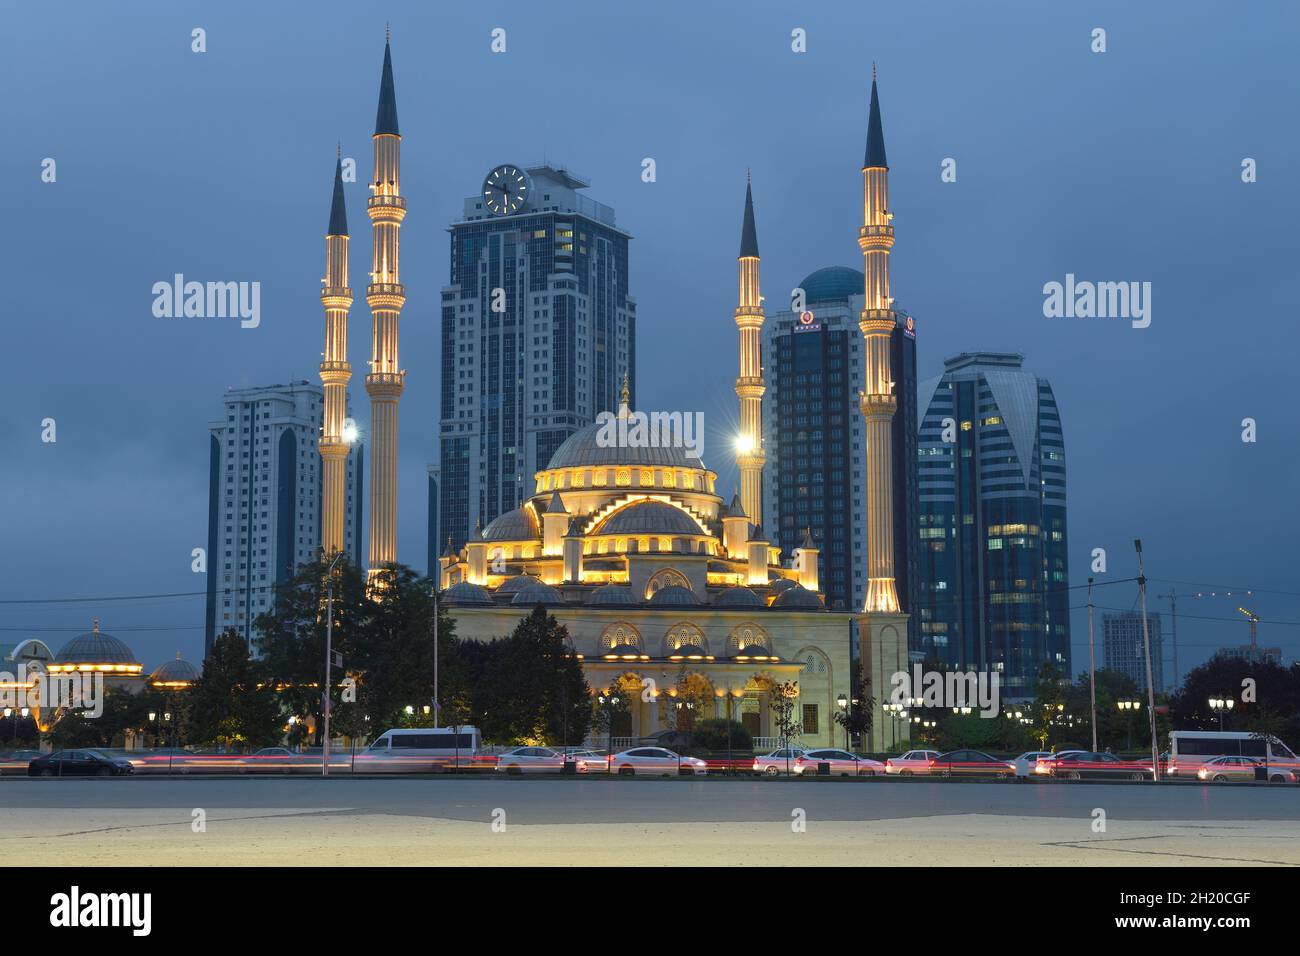 GROZNIY, RUSSIA - SEPTEMBER 29, 2021: The 'Heart of Chechnya' Mosque against the backdrop of the Grozny City complex of buildings in September twiligh Stock Photo